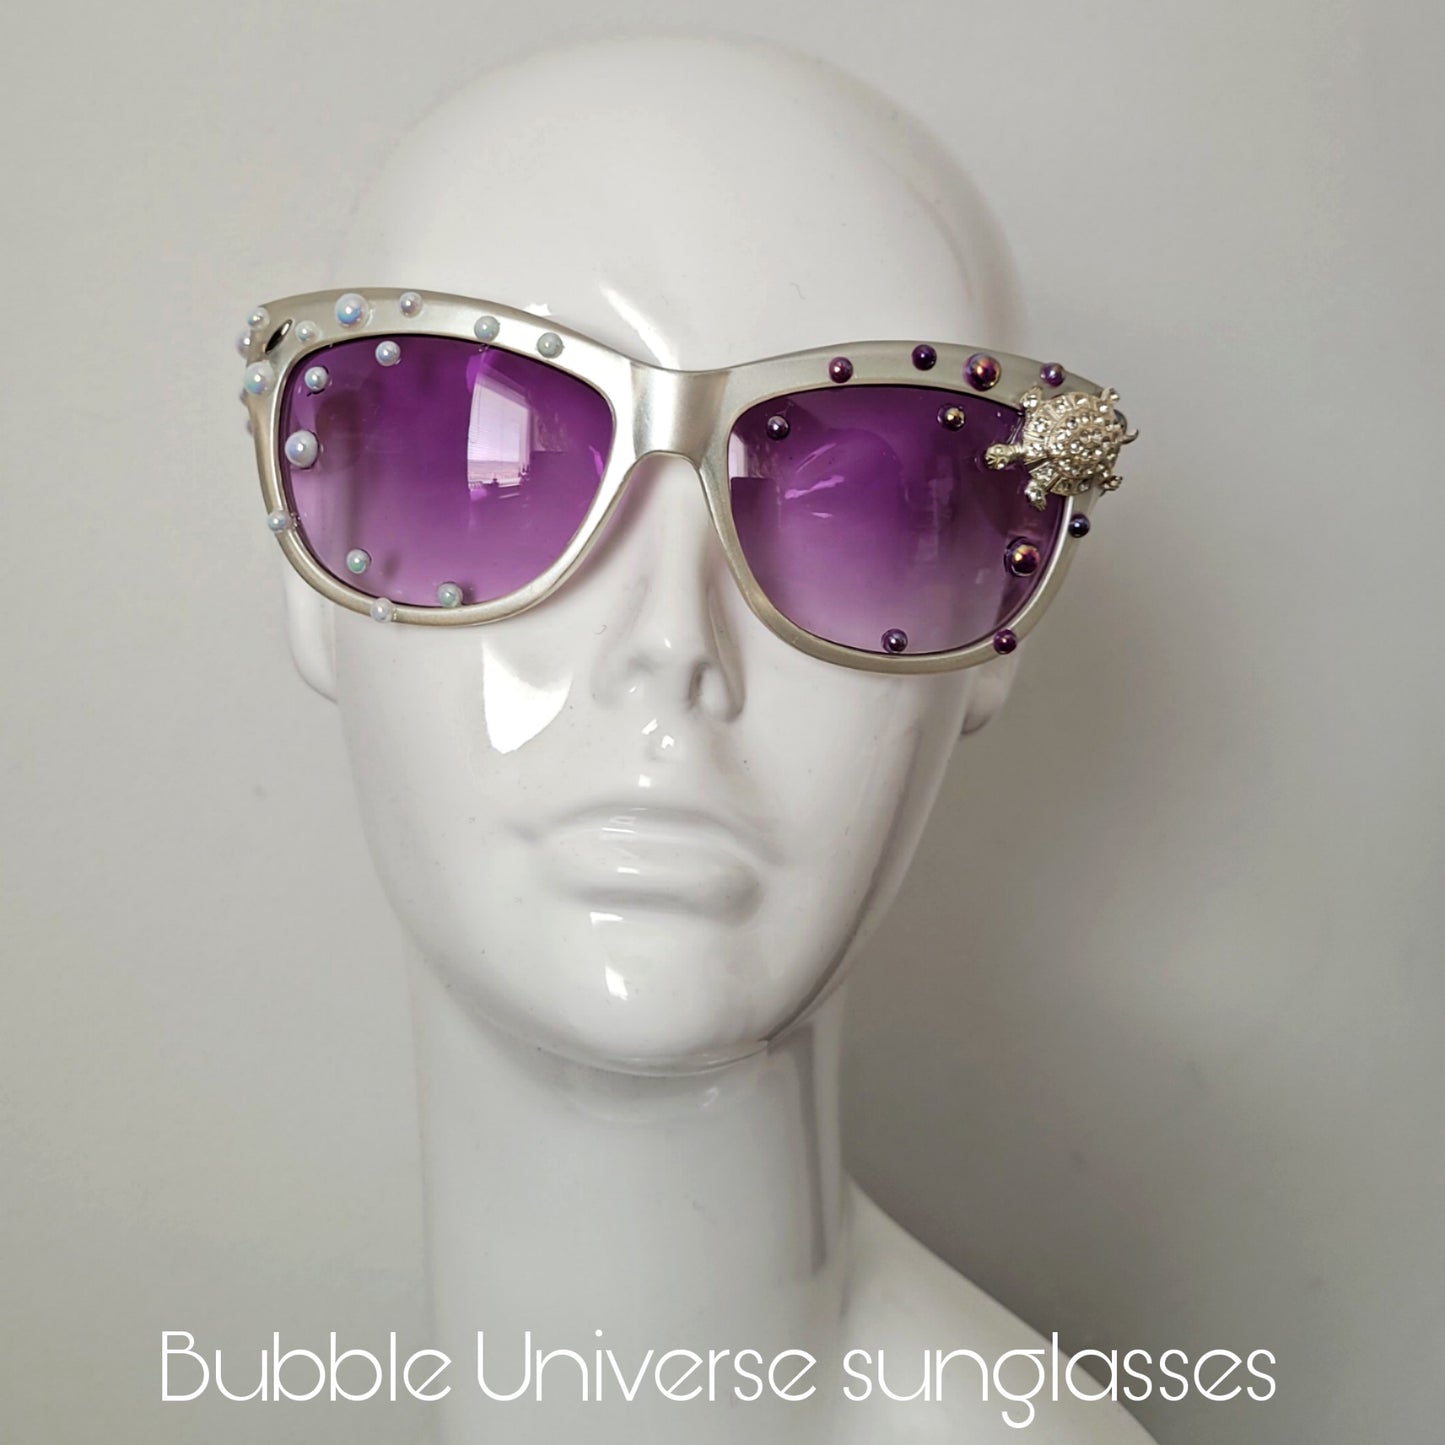 Shifting Depths collection: the Bubble Universe sunglasses